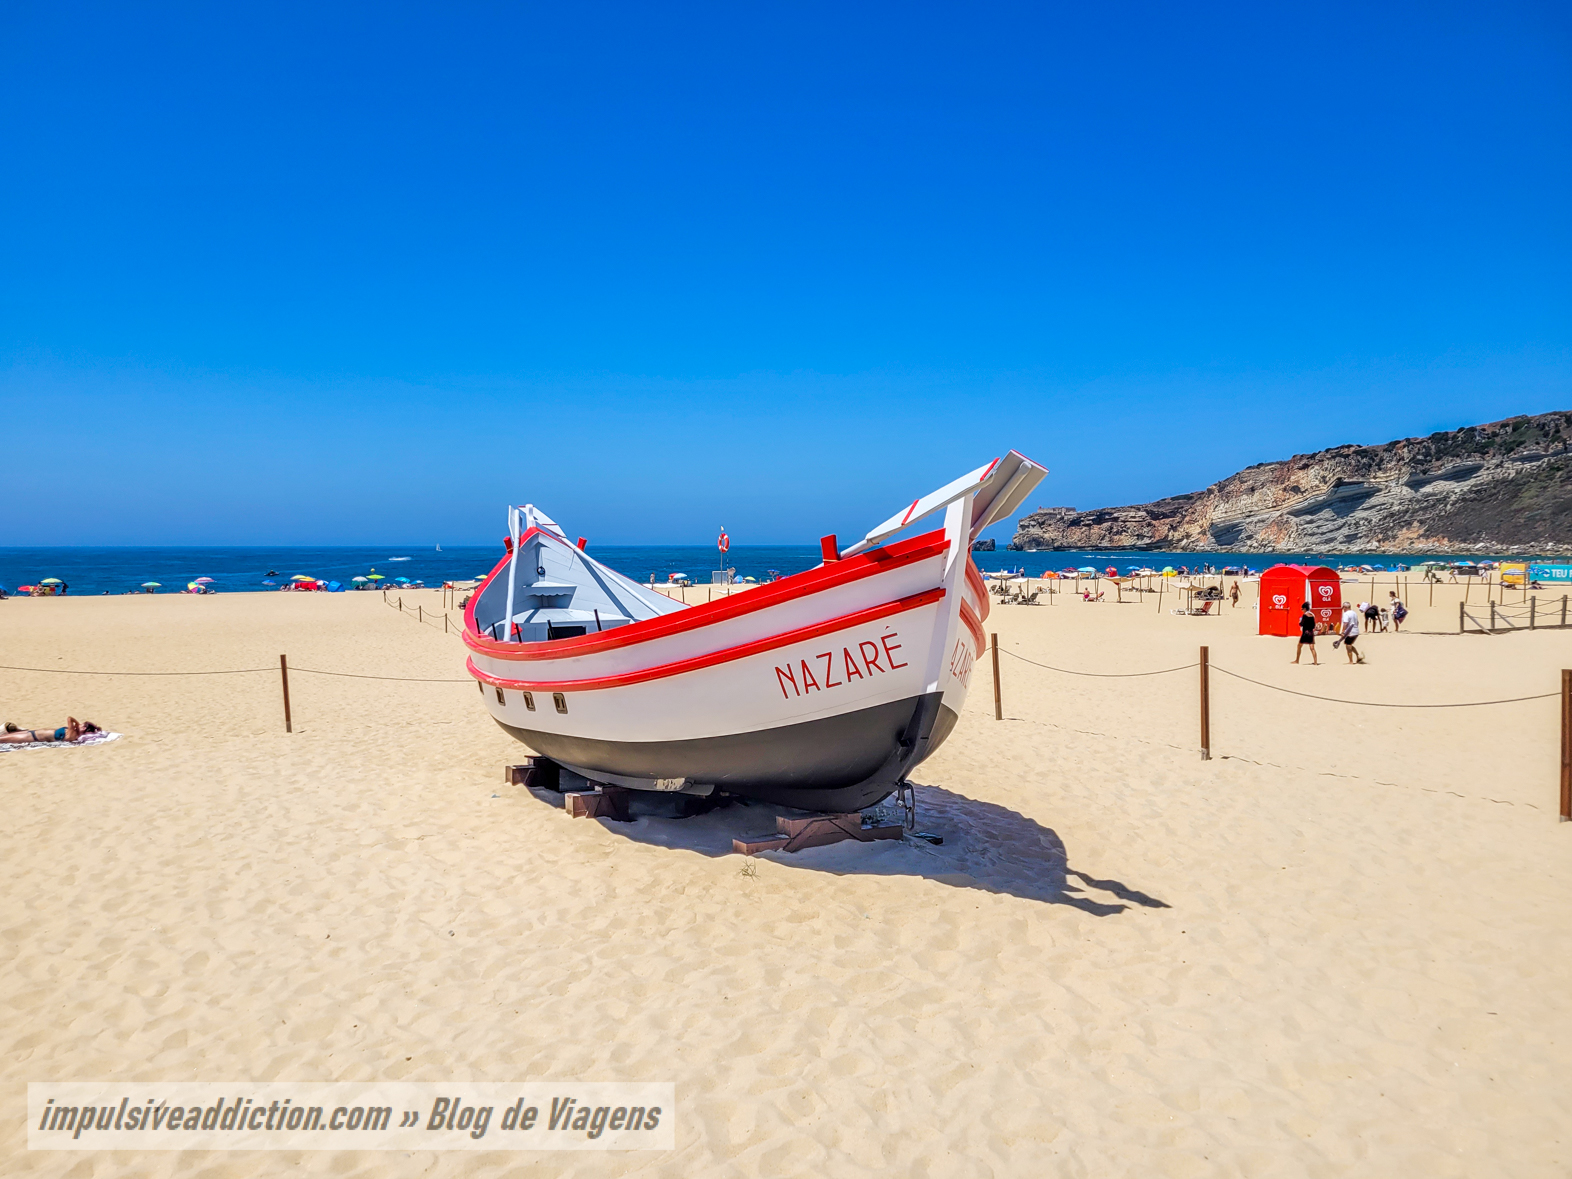 Life Boats in the beach of Nazaré